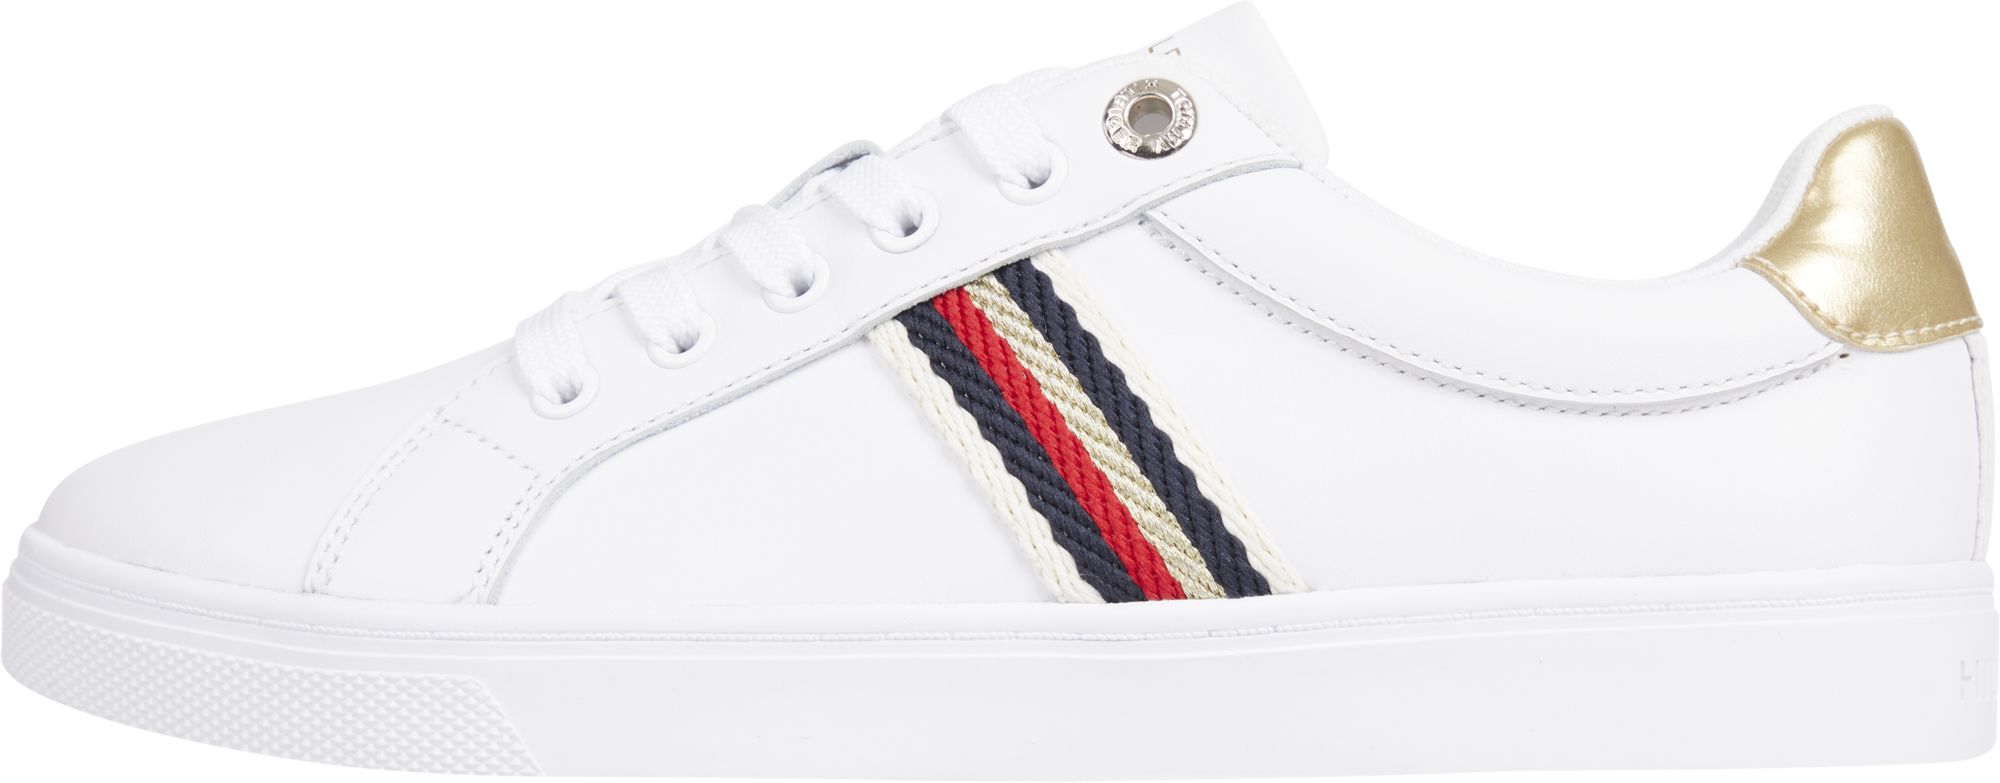 TOMMY HILFIGER Corporate Webbing Trainer White